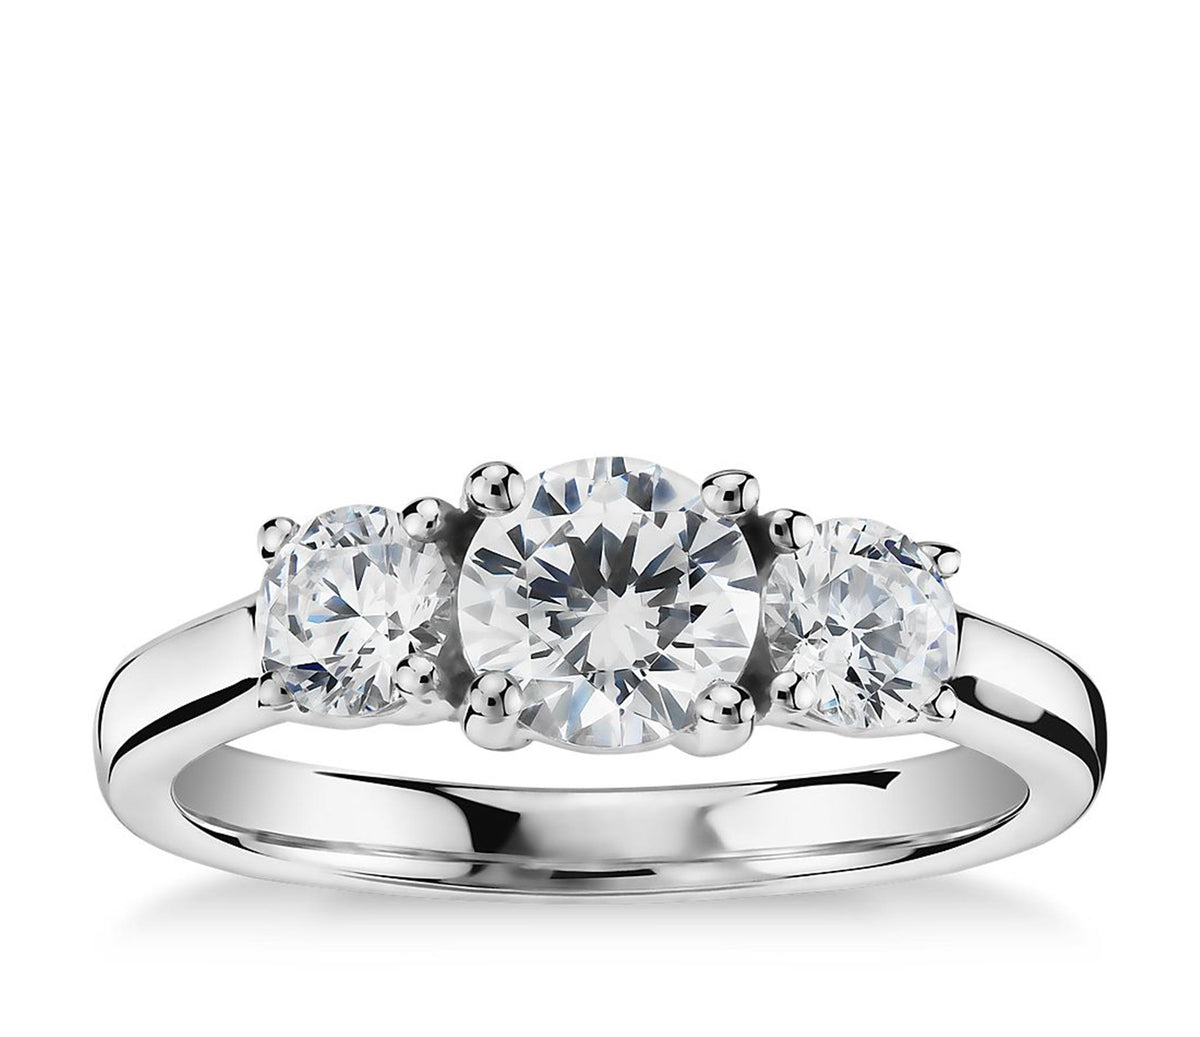 18Kt White Gold Three-Stone Ring With 1cttw Natural Diamonds